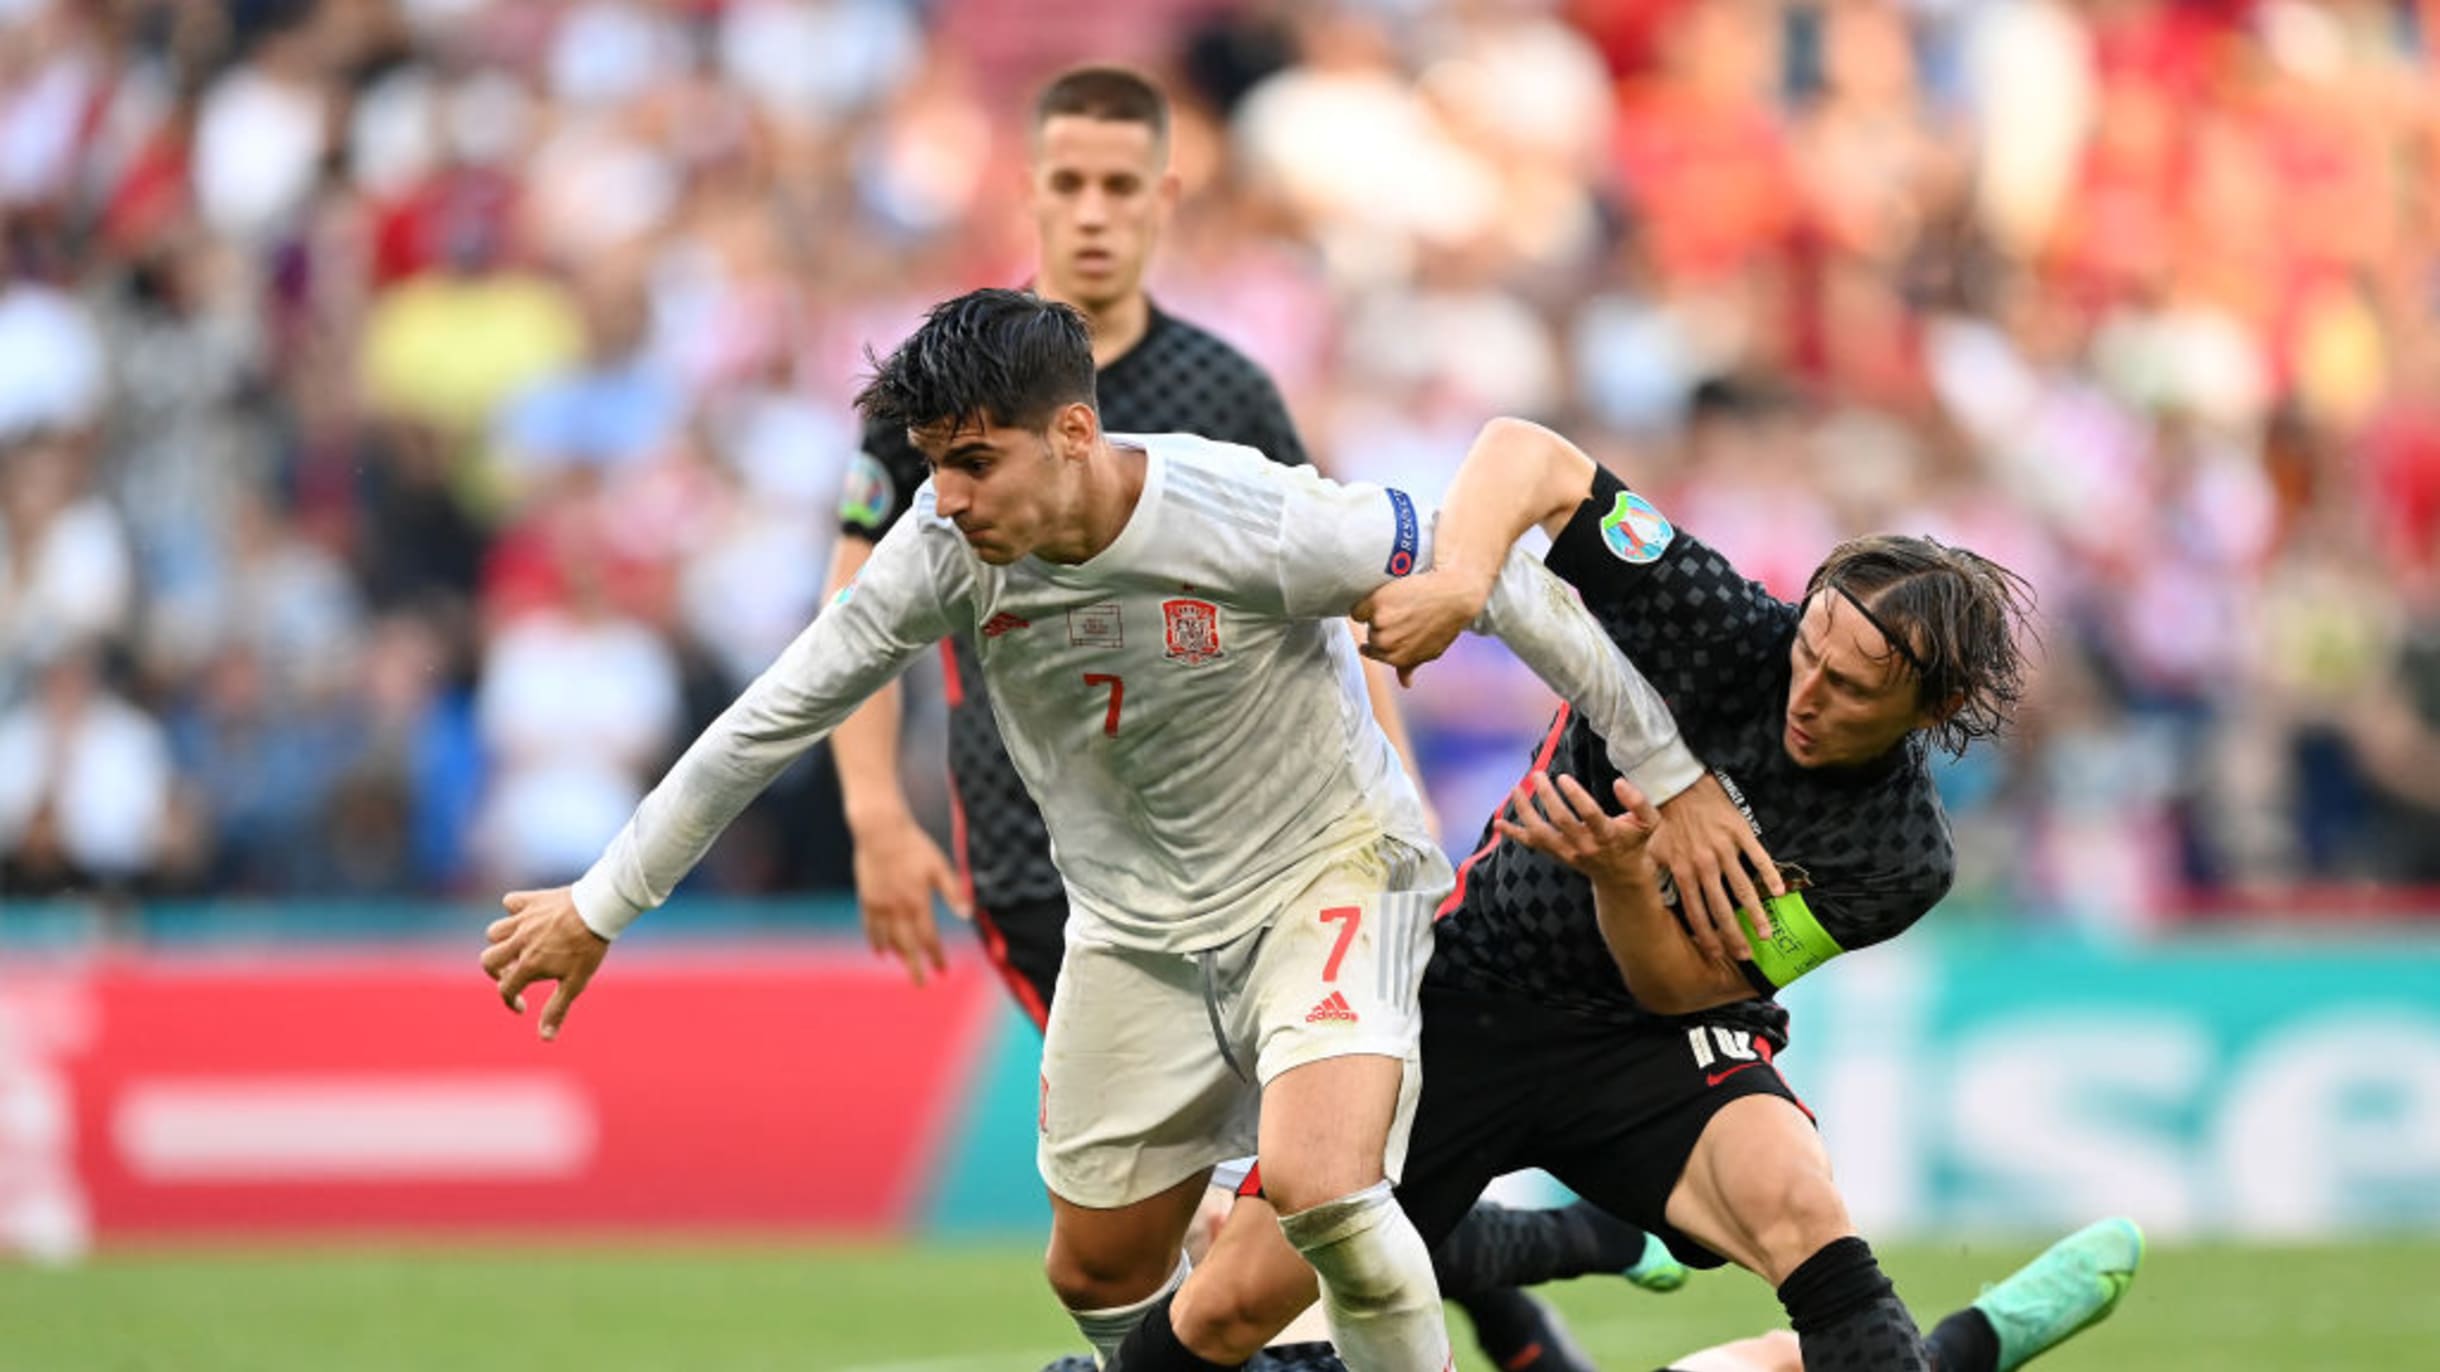 Croatia vs Spain football, UEFA Nations League 2022-23 final Get match time and watch live streaming and telecast in India